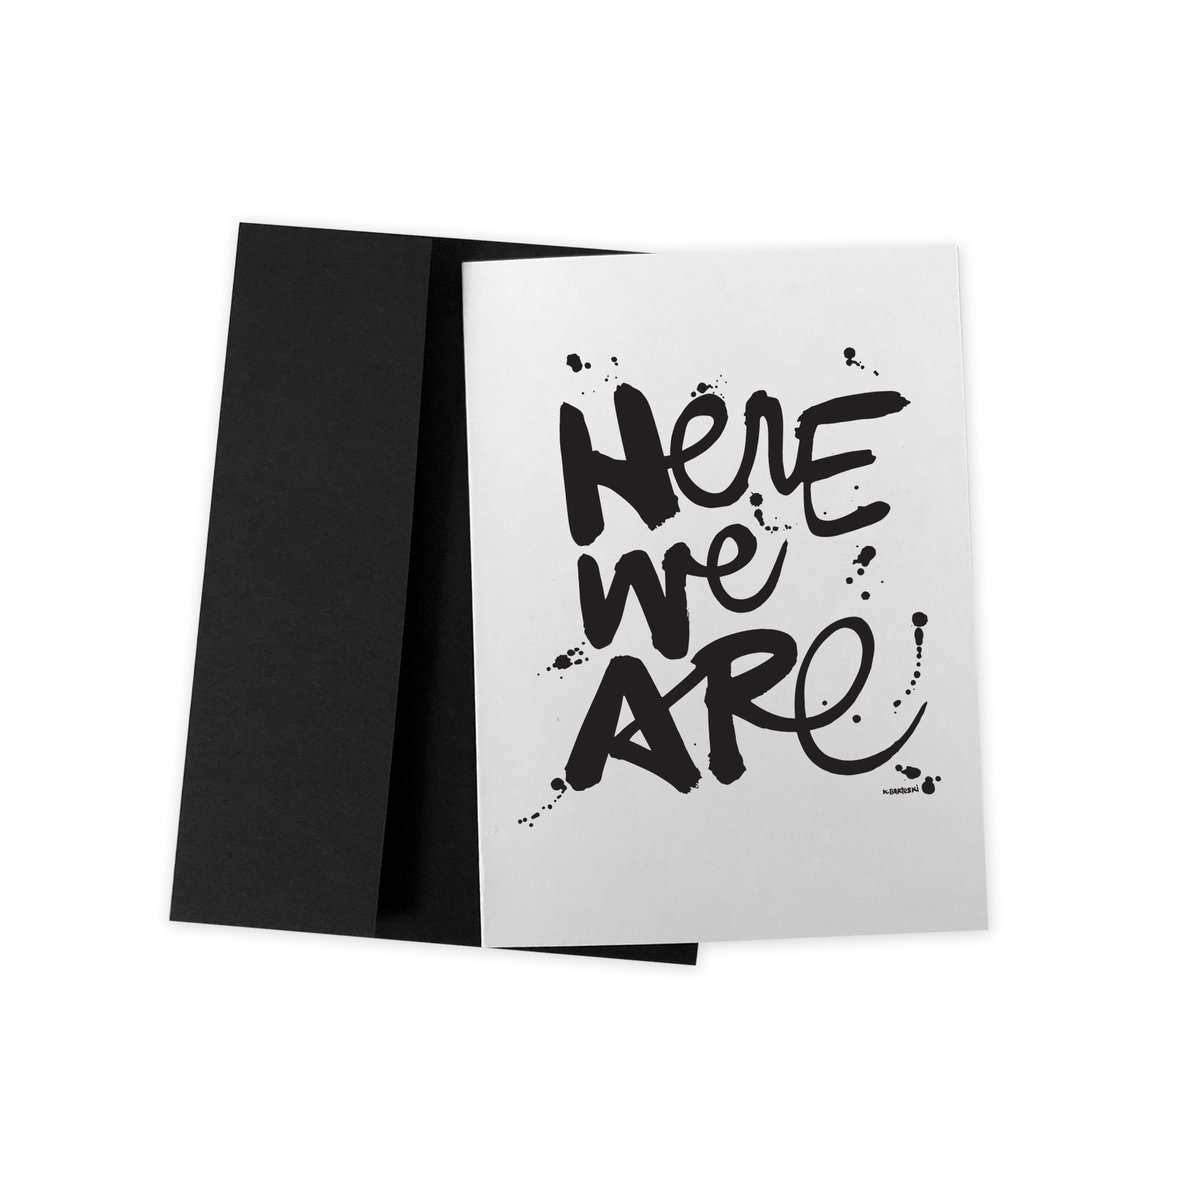 Image of HERE WE ARE #kbscript greeting card